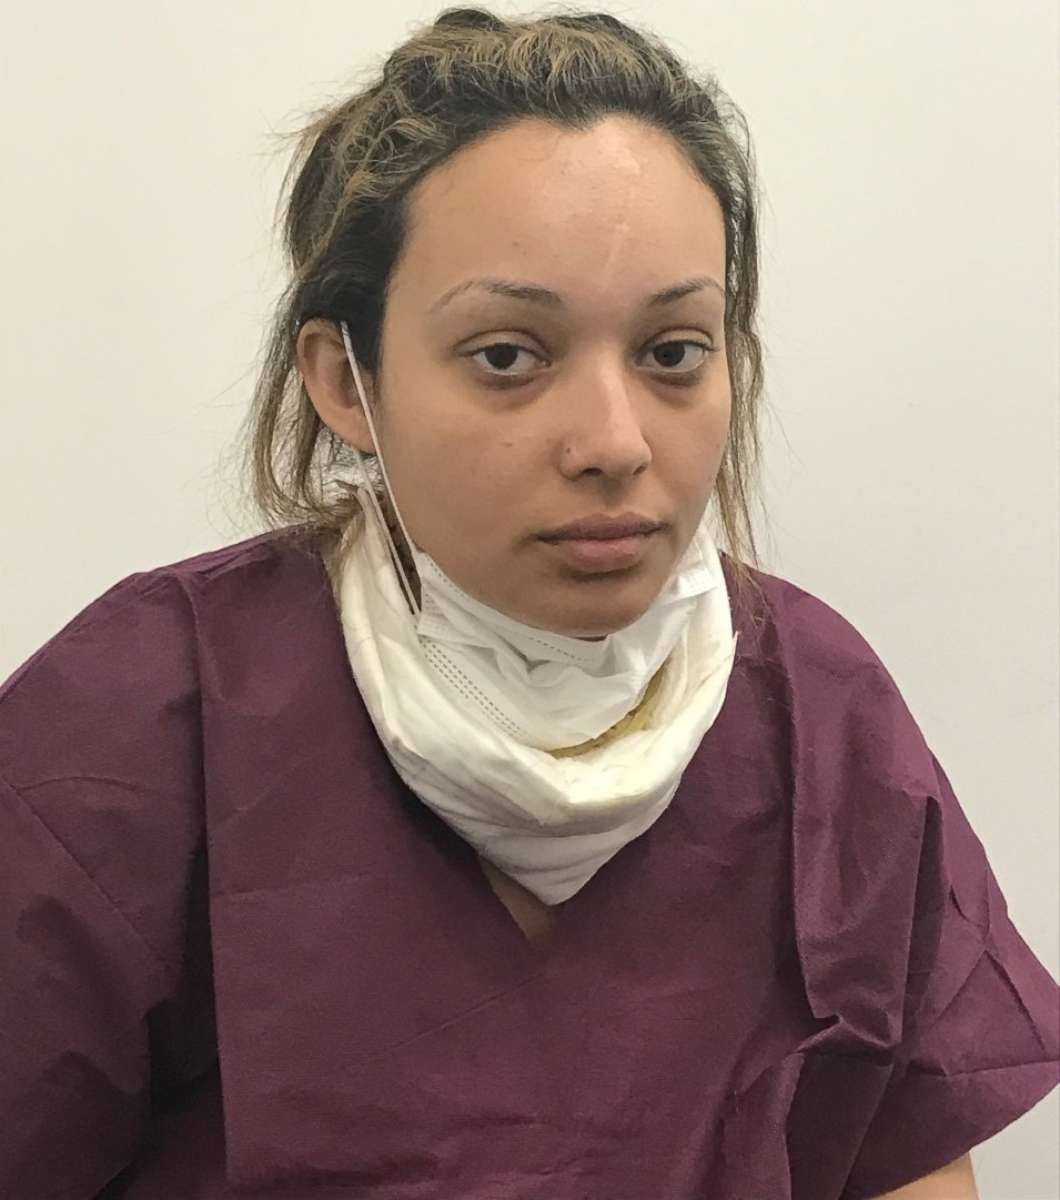 PHOTO: Anne Catherine Akers, 28, has been charged with attempted second-degree murder after her 3-year-old daughter was found with a life-threatening wound to her neck on March 27, 2021 in Montgomery County, Maryland.  